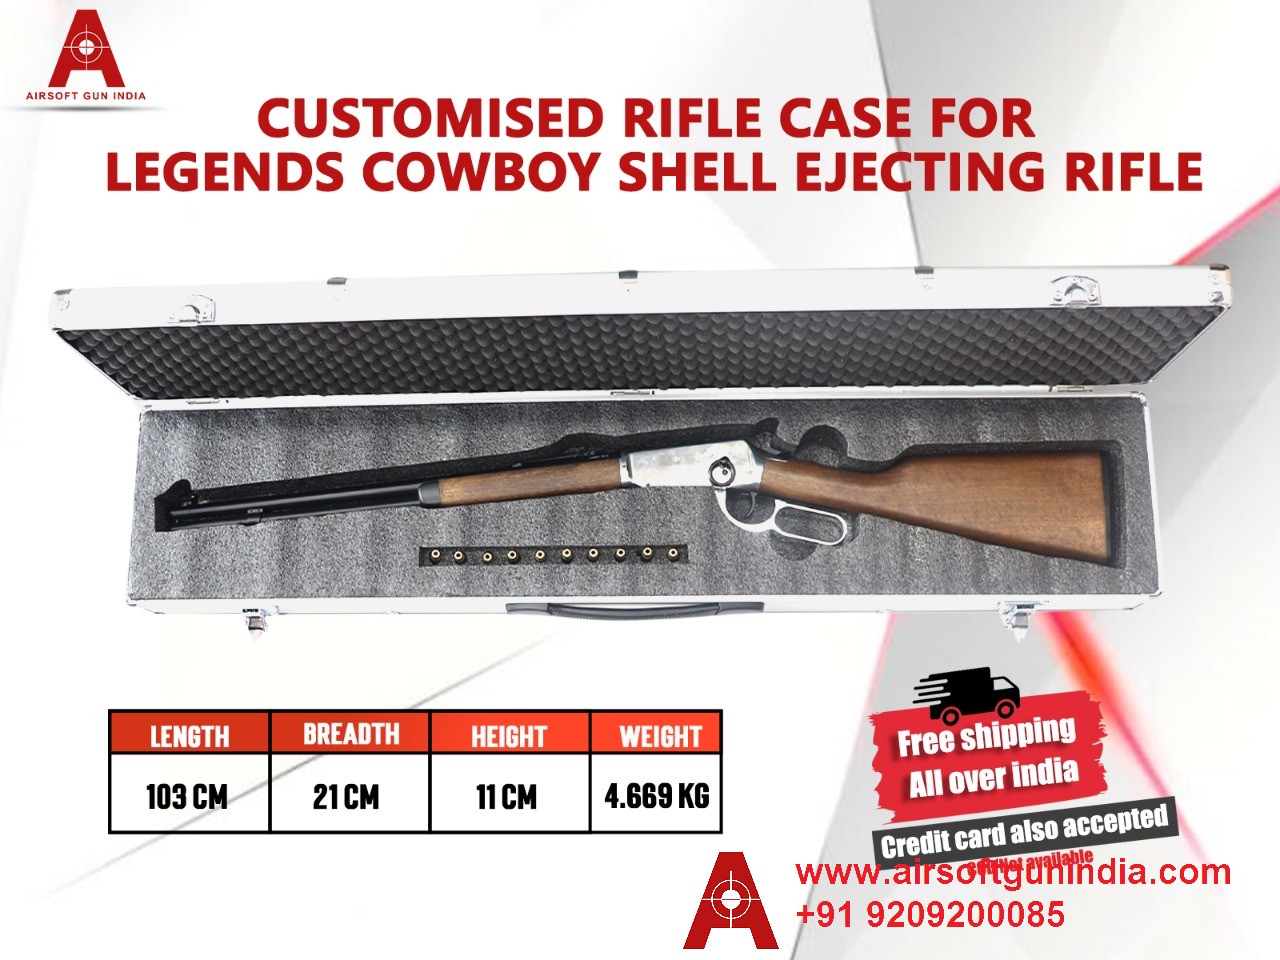 Customized Rifle Case For Legends Cowboy Shell Ejecting Rifle By Airsoft Gun India